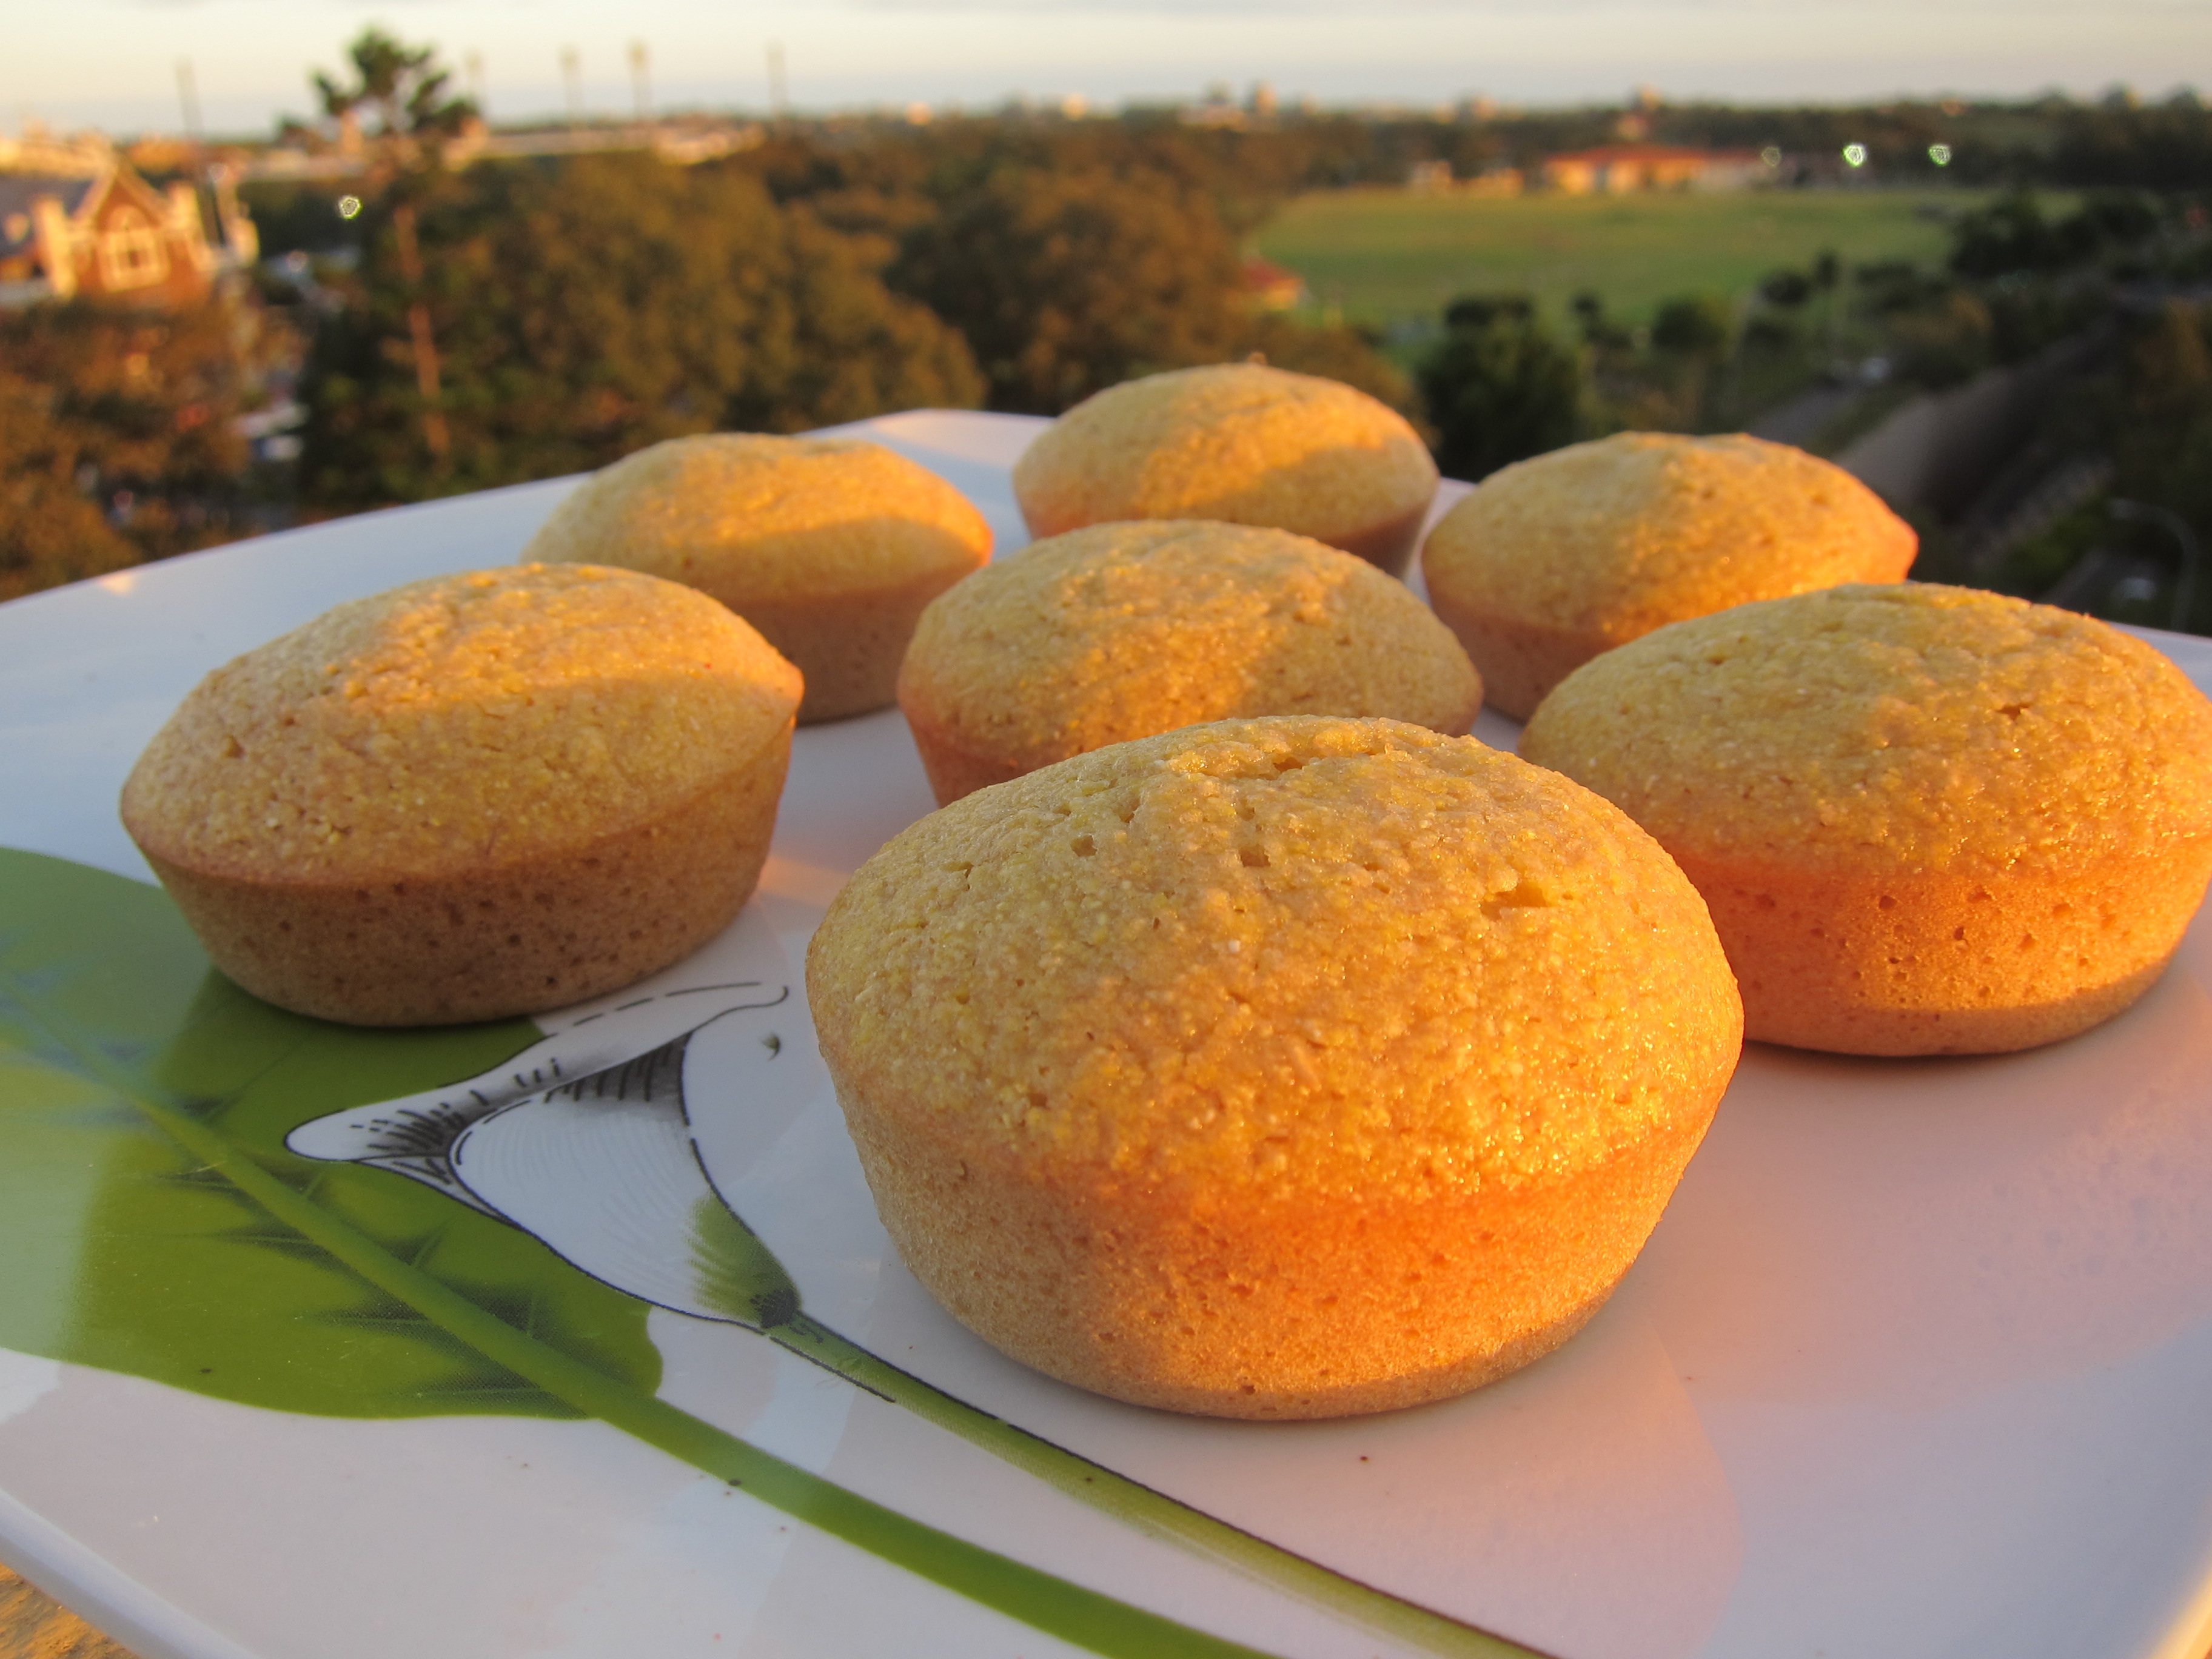 Corn muffins cooling as the sun sets